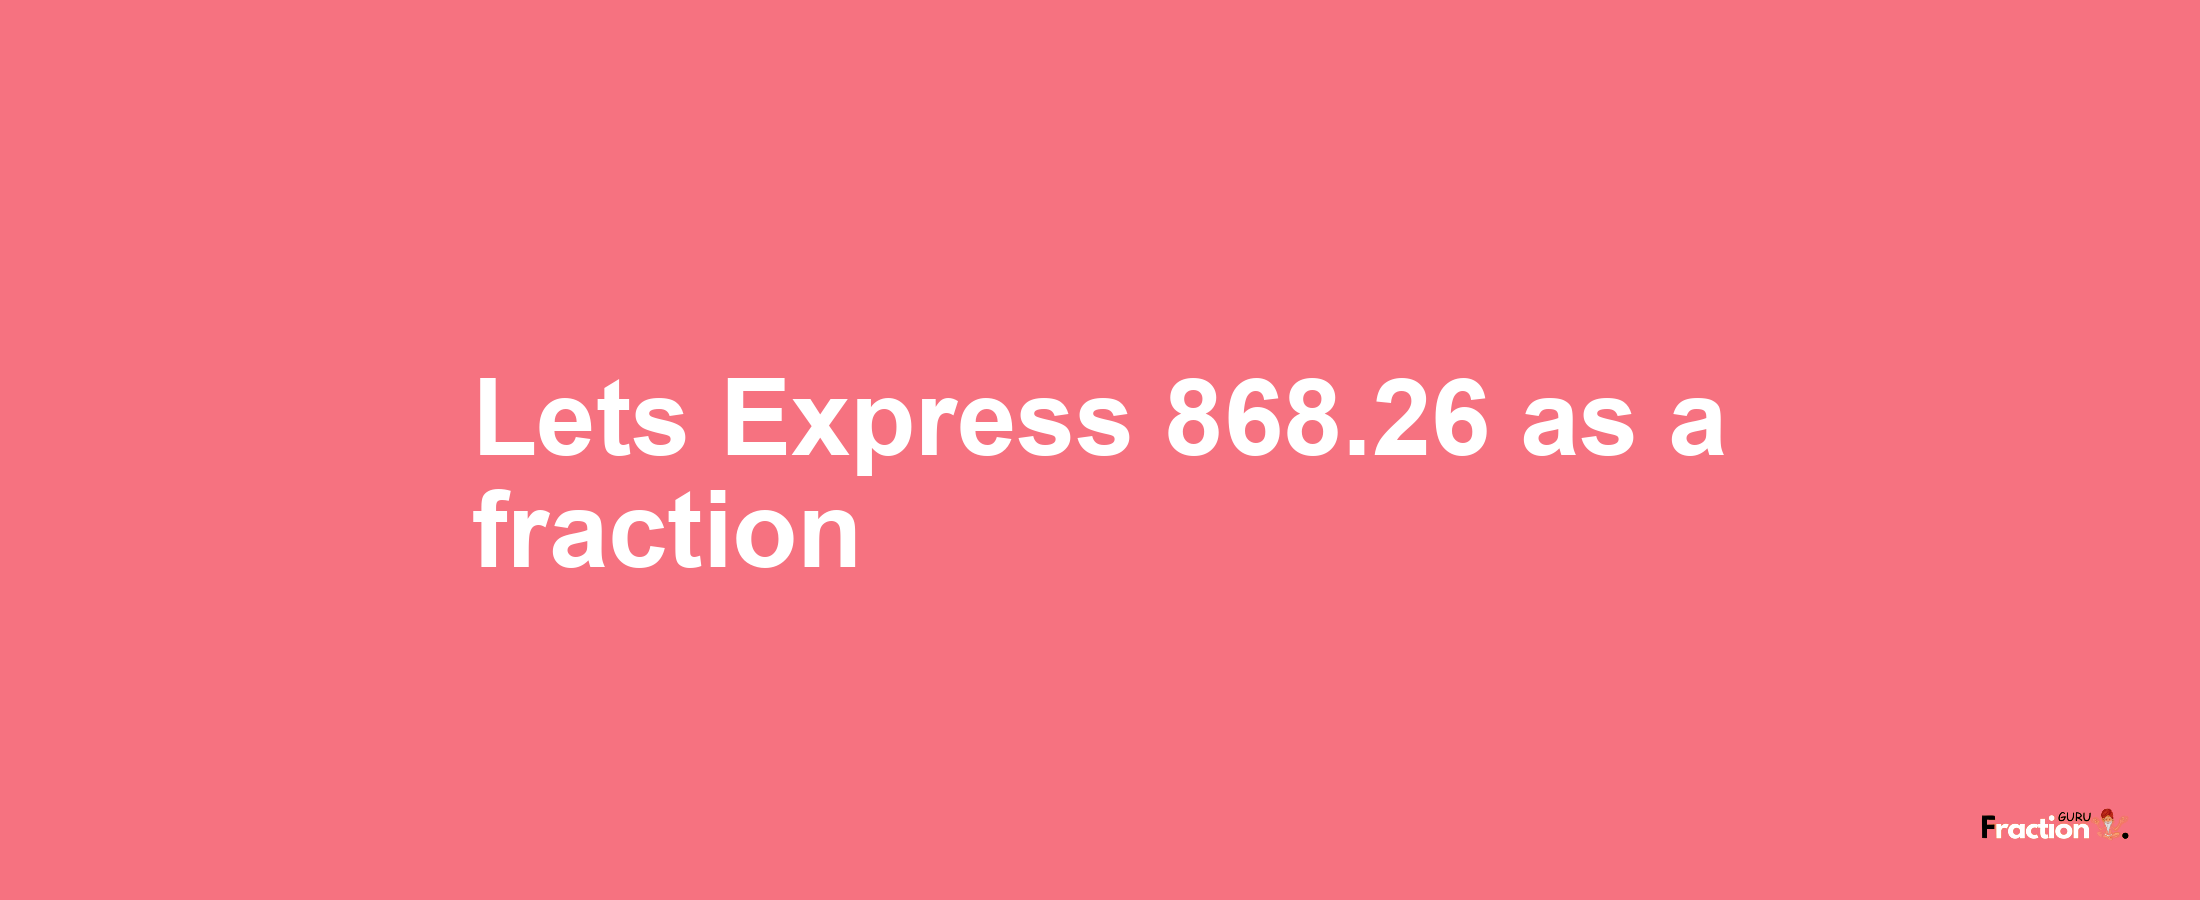 Lets Express 868.26 as afraction